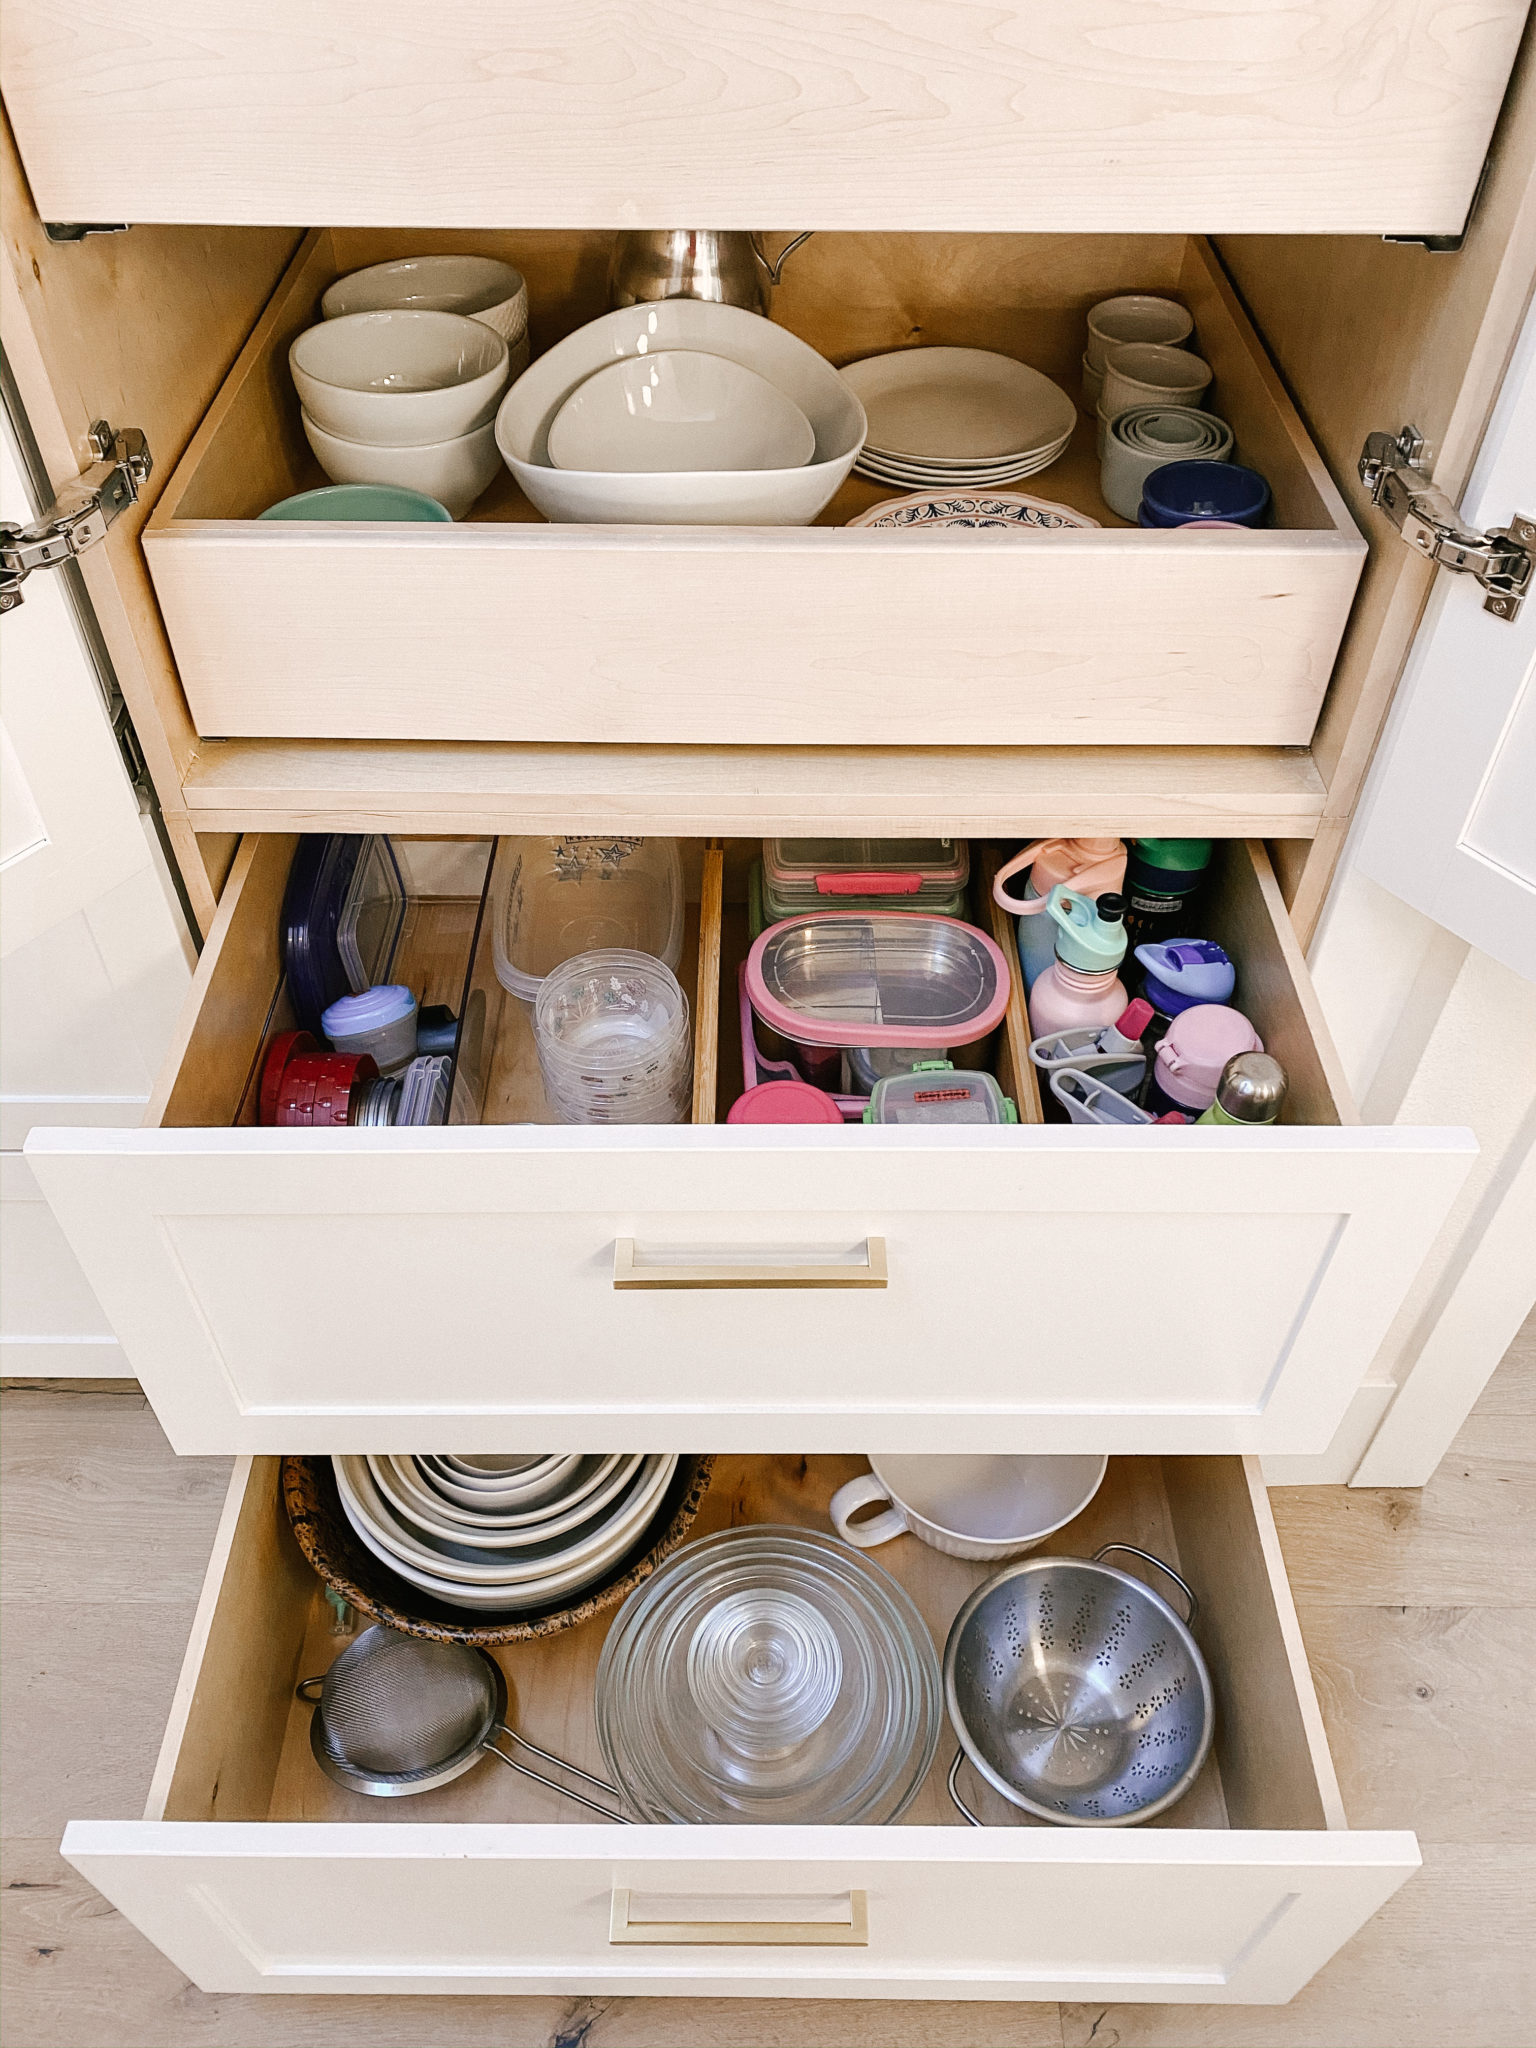 How To Organize Kitchen Drawers, Cabinets And Drawers Design